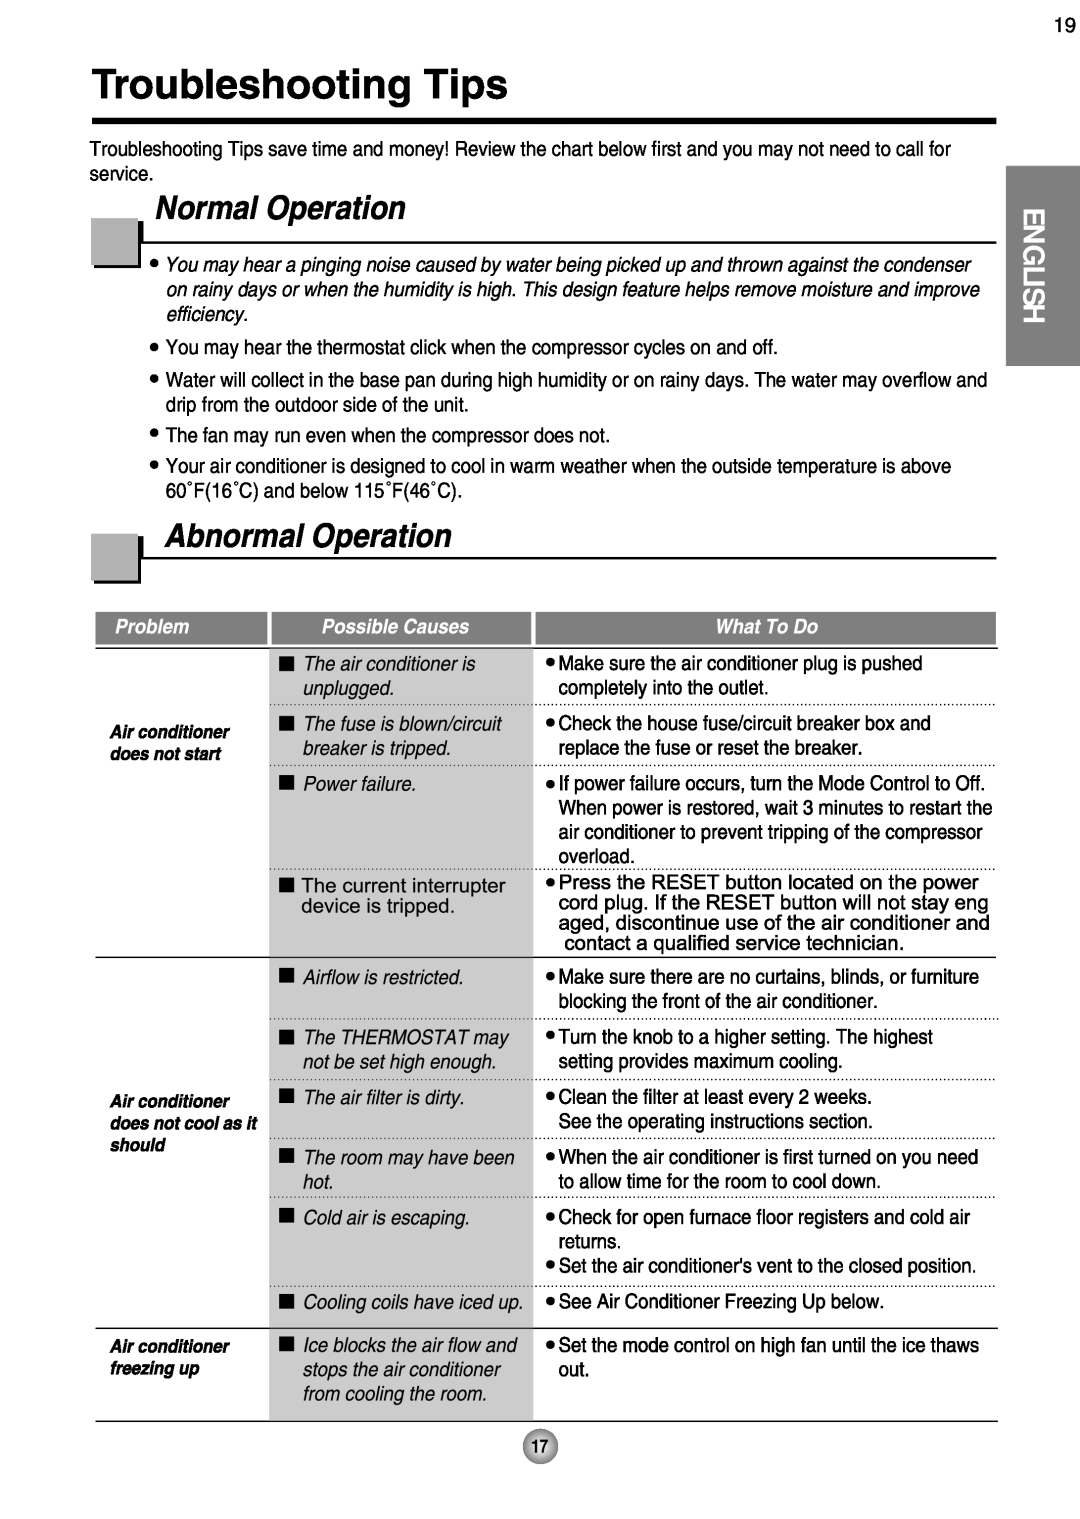 Friedrich CP08 operation manual Troubleshooting Tips, Normal Operation, Abnormal Operation, English 